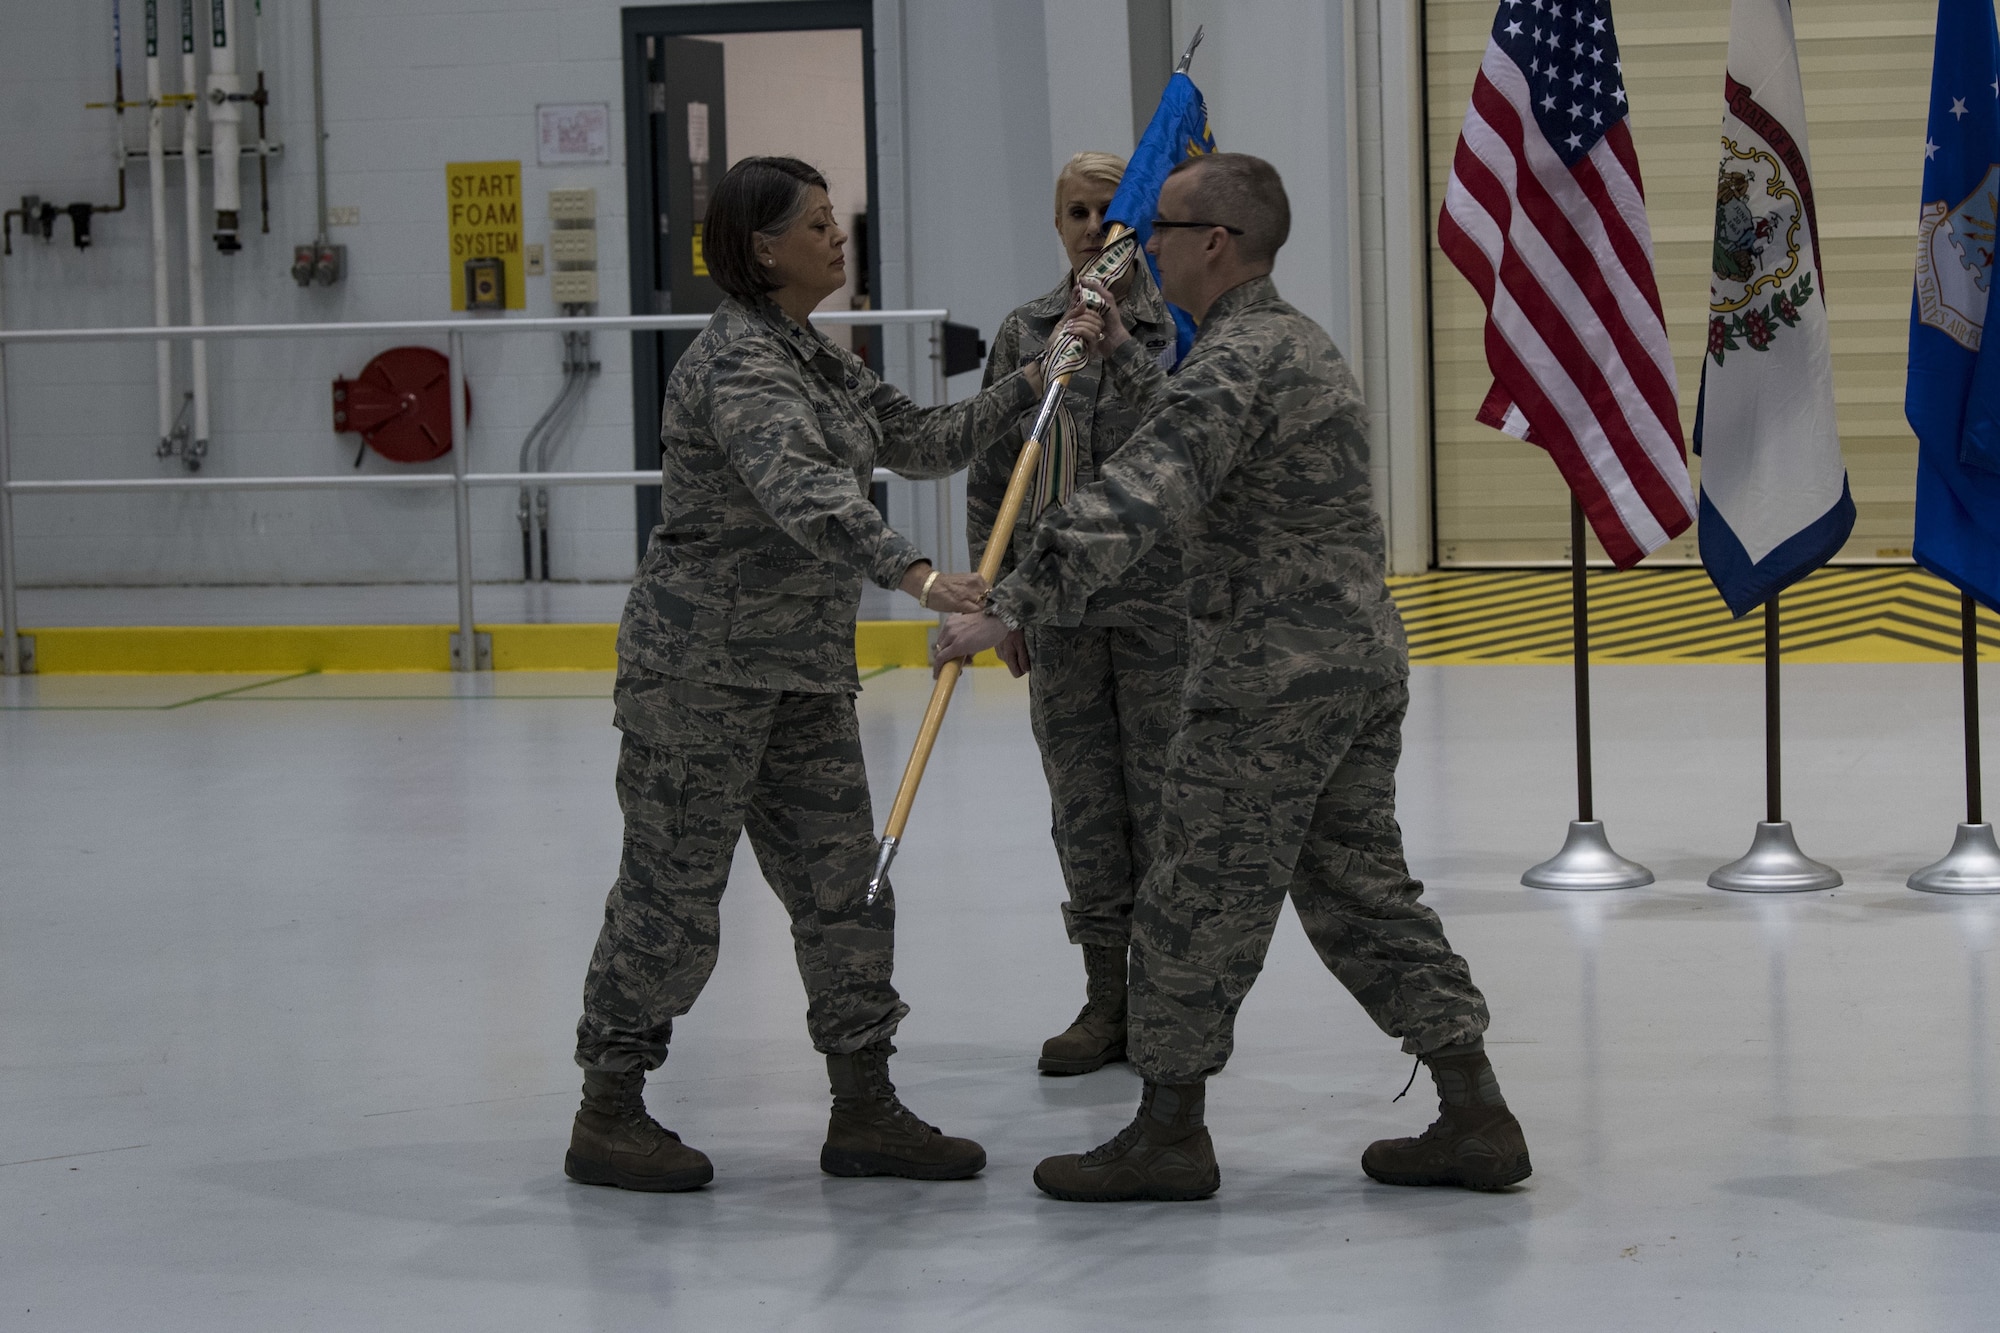 U.S. Air Force Brig. Gen. Paige Hunter (left), the West Virginia National Guard Assistant Adjutant General - Air, gives command of the 130th Maintenance Group to U.S. Air Force Col. Patrick Chard at the 130th MXG change of command Feb. 1, 2018 at McLaughlin Air National Guard Base, Charleston, W.Va.Chard is assuming the command of the 130th MXG after being the Director of Staff at Headquarters West Virginia Air National Guard.(U.S. Air National Guard Photo by Airman 1st Class Caleb Vance)